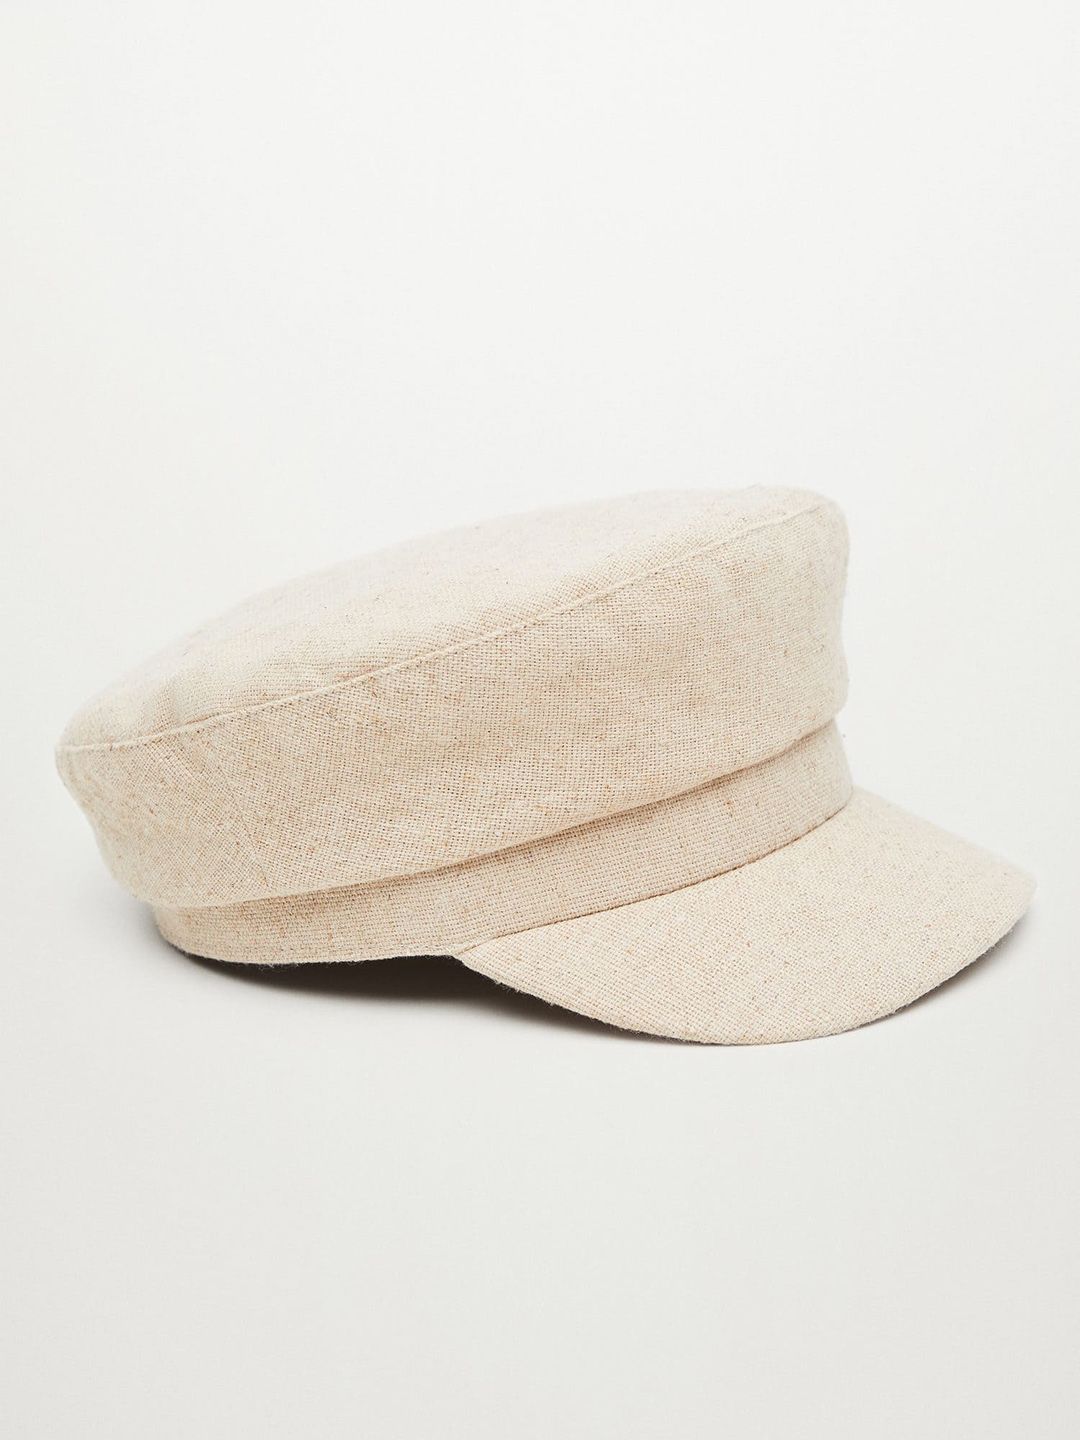 MANGO Women Off-White Solid Bakerboy Hat Price in India